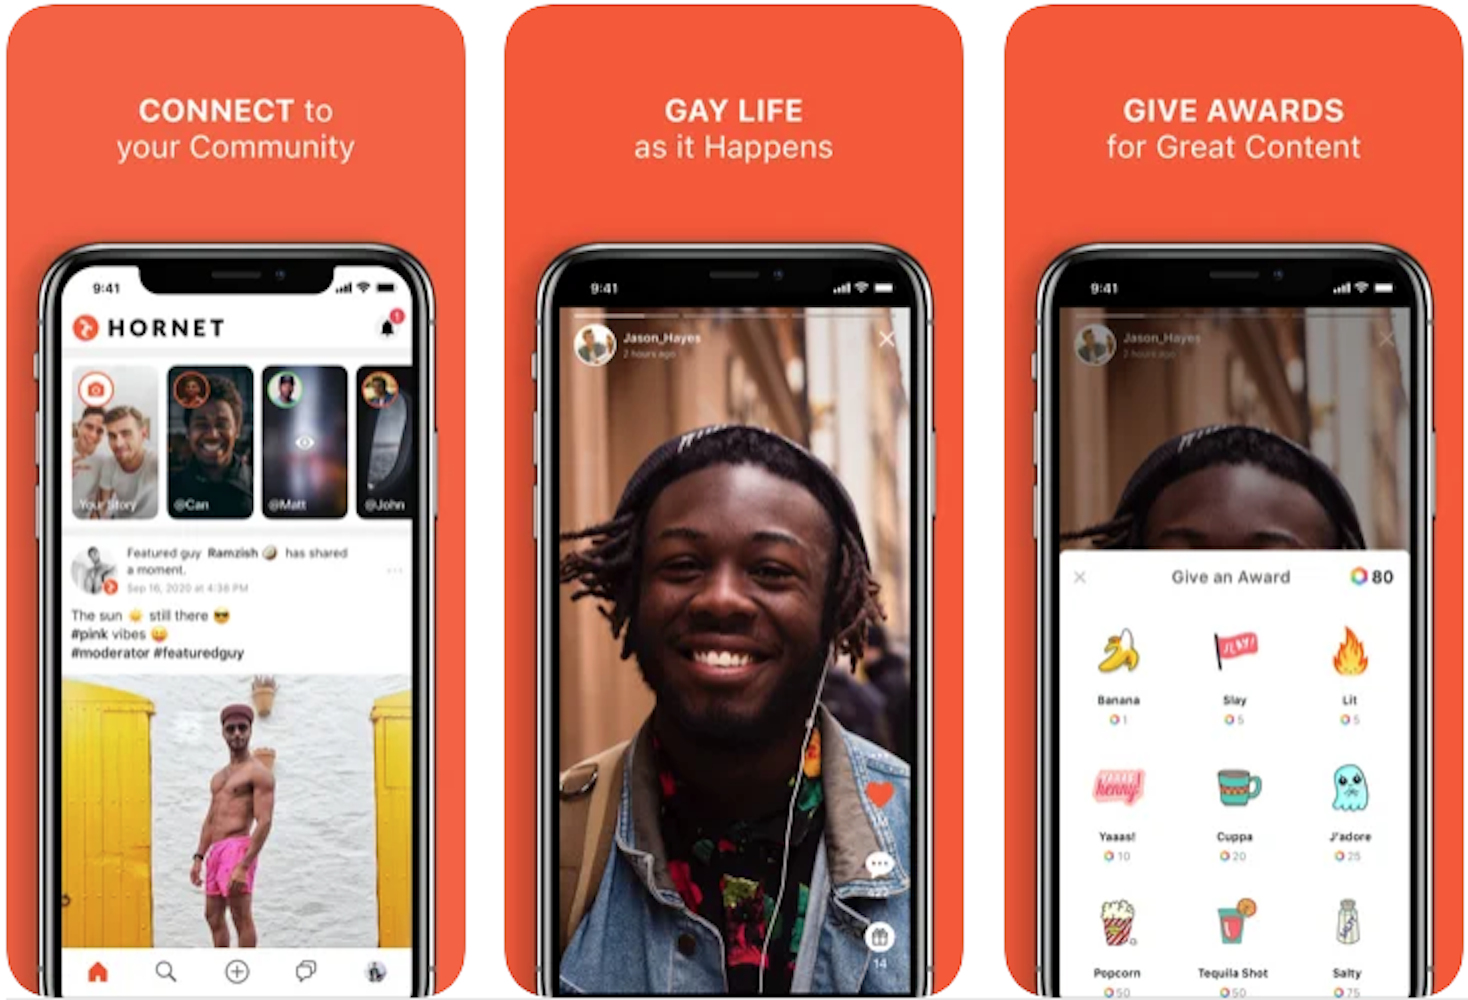 Gay dating app Hornet's many different community options are displayed